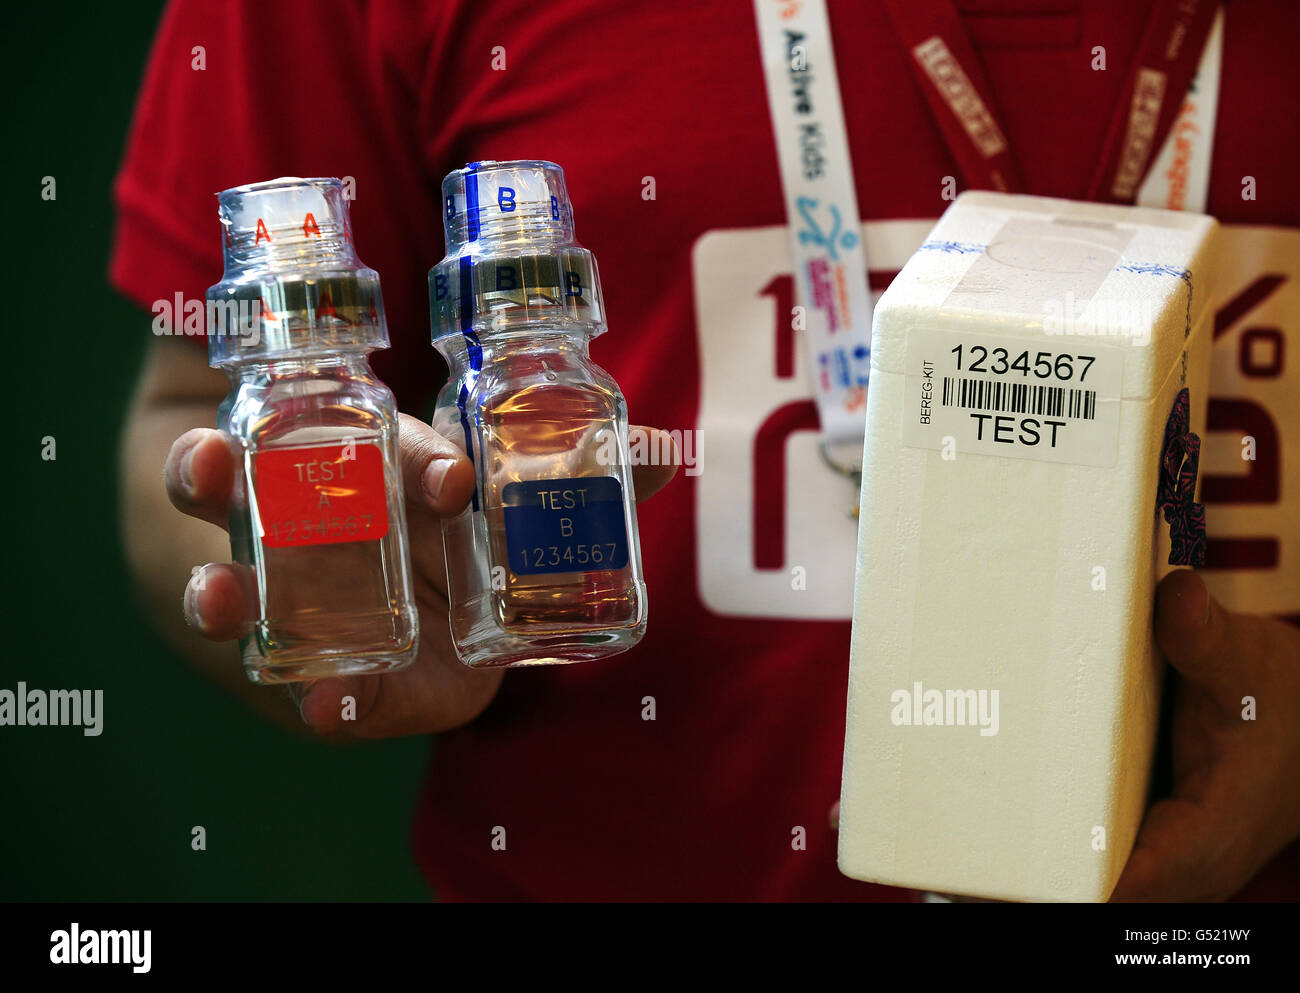 Sealed containers containing the A and B samples from drug tested athletes wait to be used and then sent to the Laboratory for analysis during a photo session at a facility in Sheffield. Stock Photo